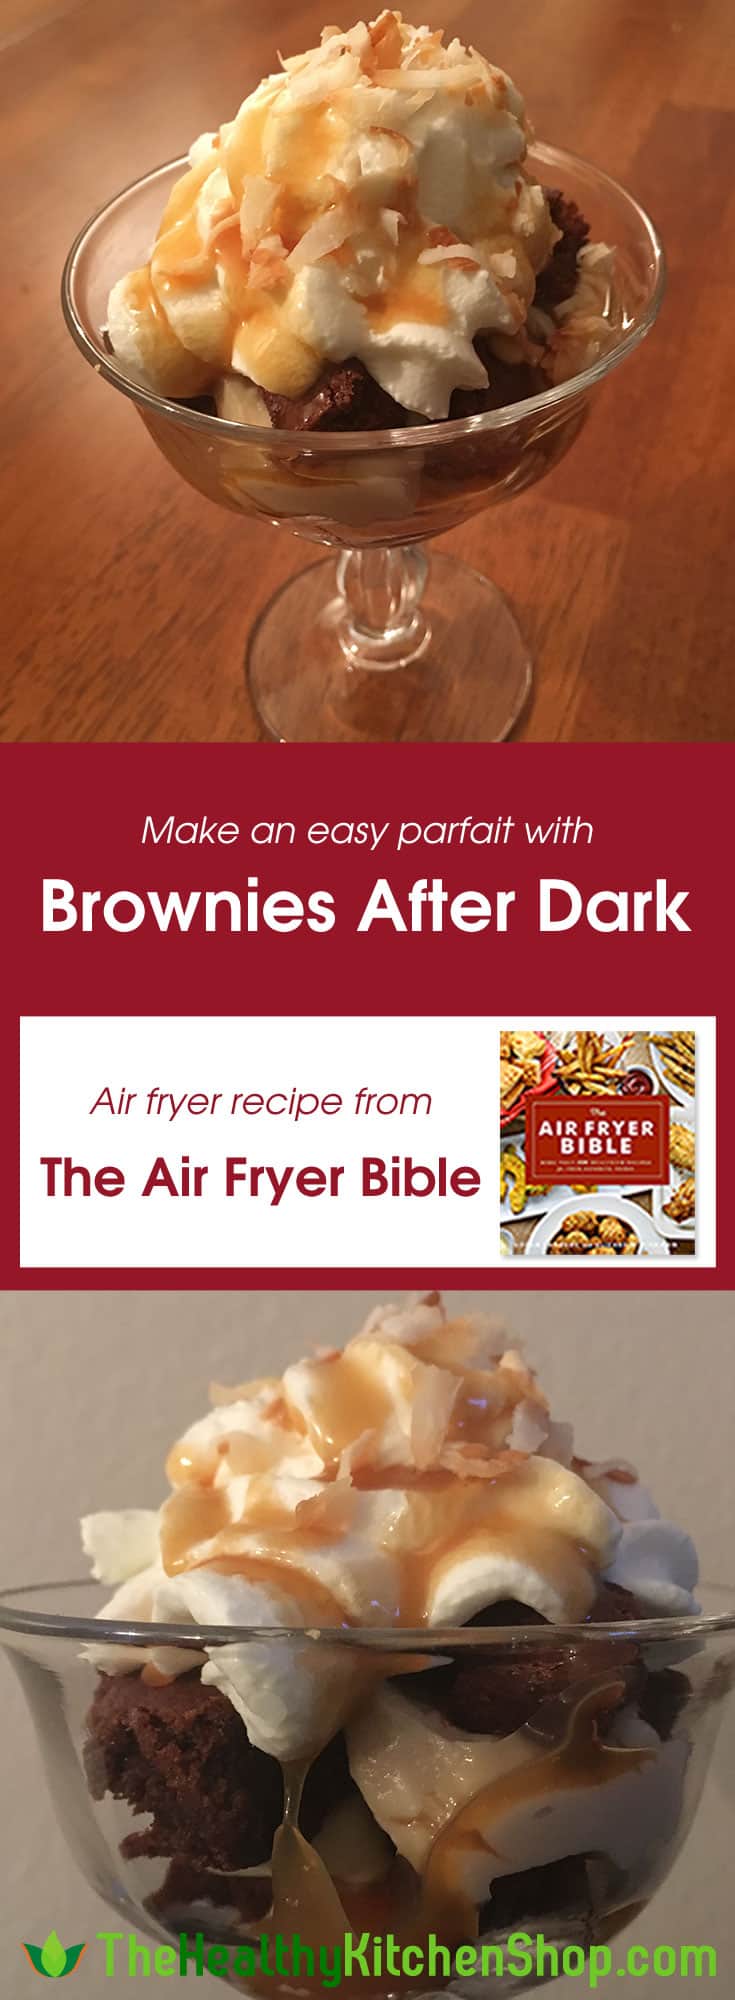 Make an easy parfait with Brownies After Dark,, air fryer recipe from The Air Fryer Bible, TheHealtyKitchenShop.com